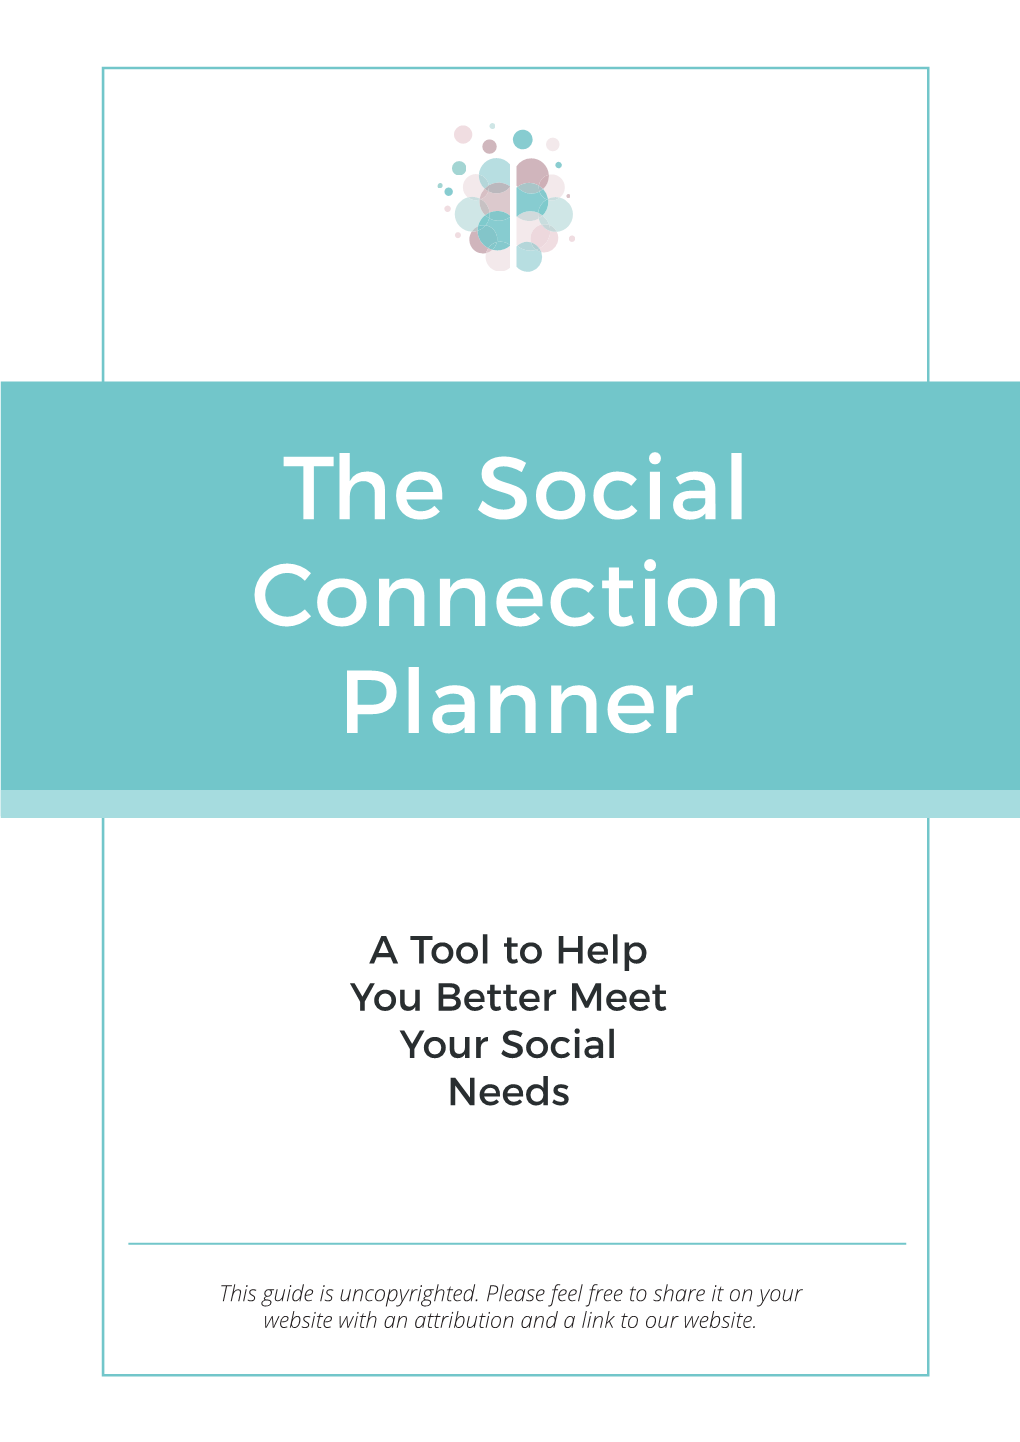 The Social Connection Planner